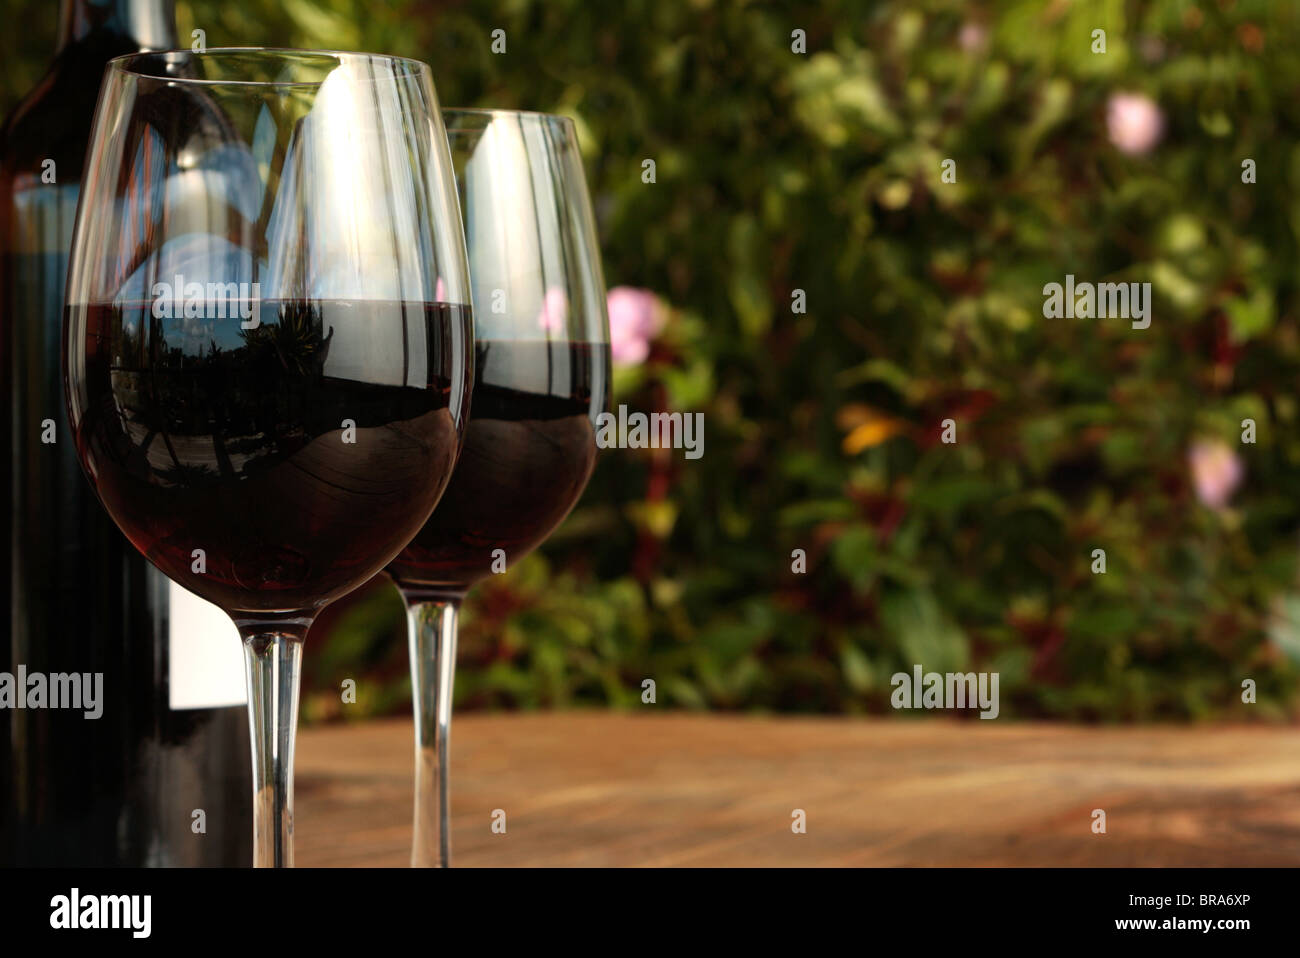 Bottle & Glasses of Red Wine on Table 3 Stock Photo